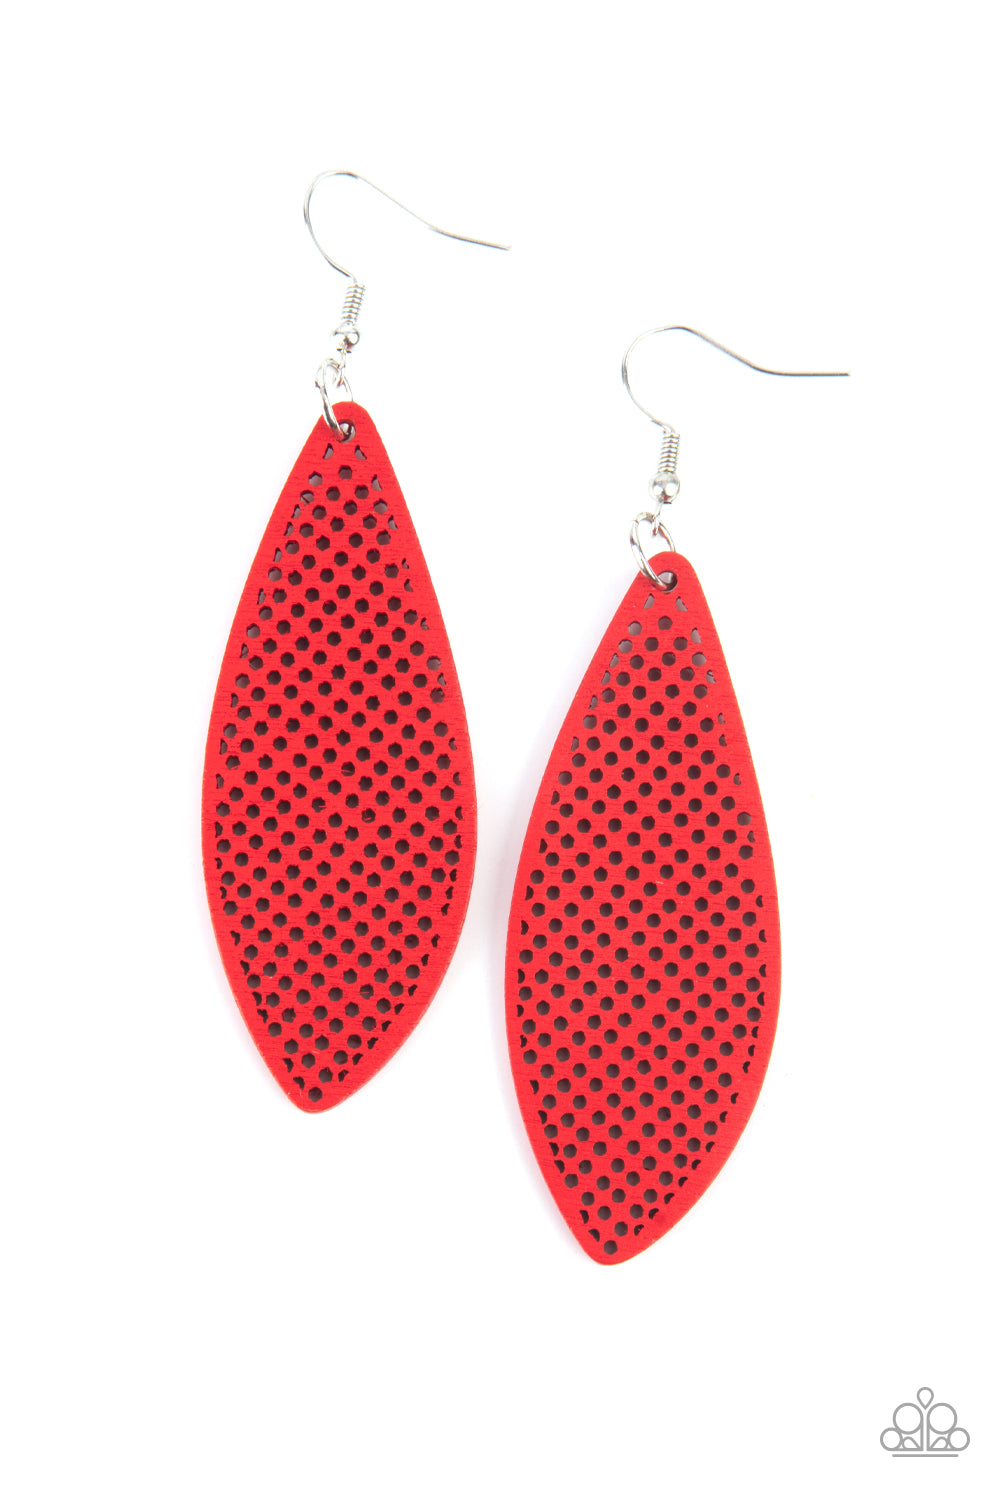 Surf Scene Red Earring - Paparazzi Accessories  In an asymmetrical surfboard-like shape, lightweight wooden frames are painted in a vibrant red finish and filled with a screen-like pattern creating a whimsically beachy design. Earring attaches to a standard fishhook fitting.  All Paparazzi Accessories are lead free and nickel free!  Sold as one pair of earrings.